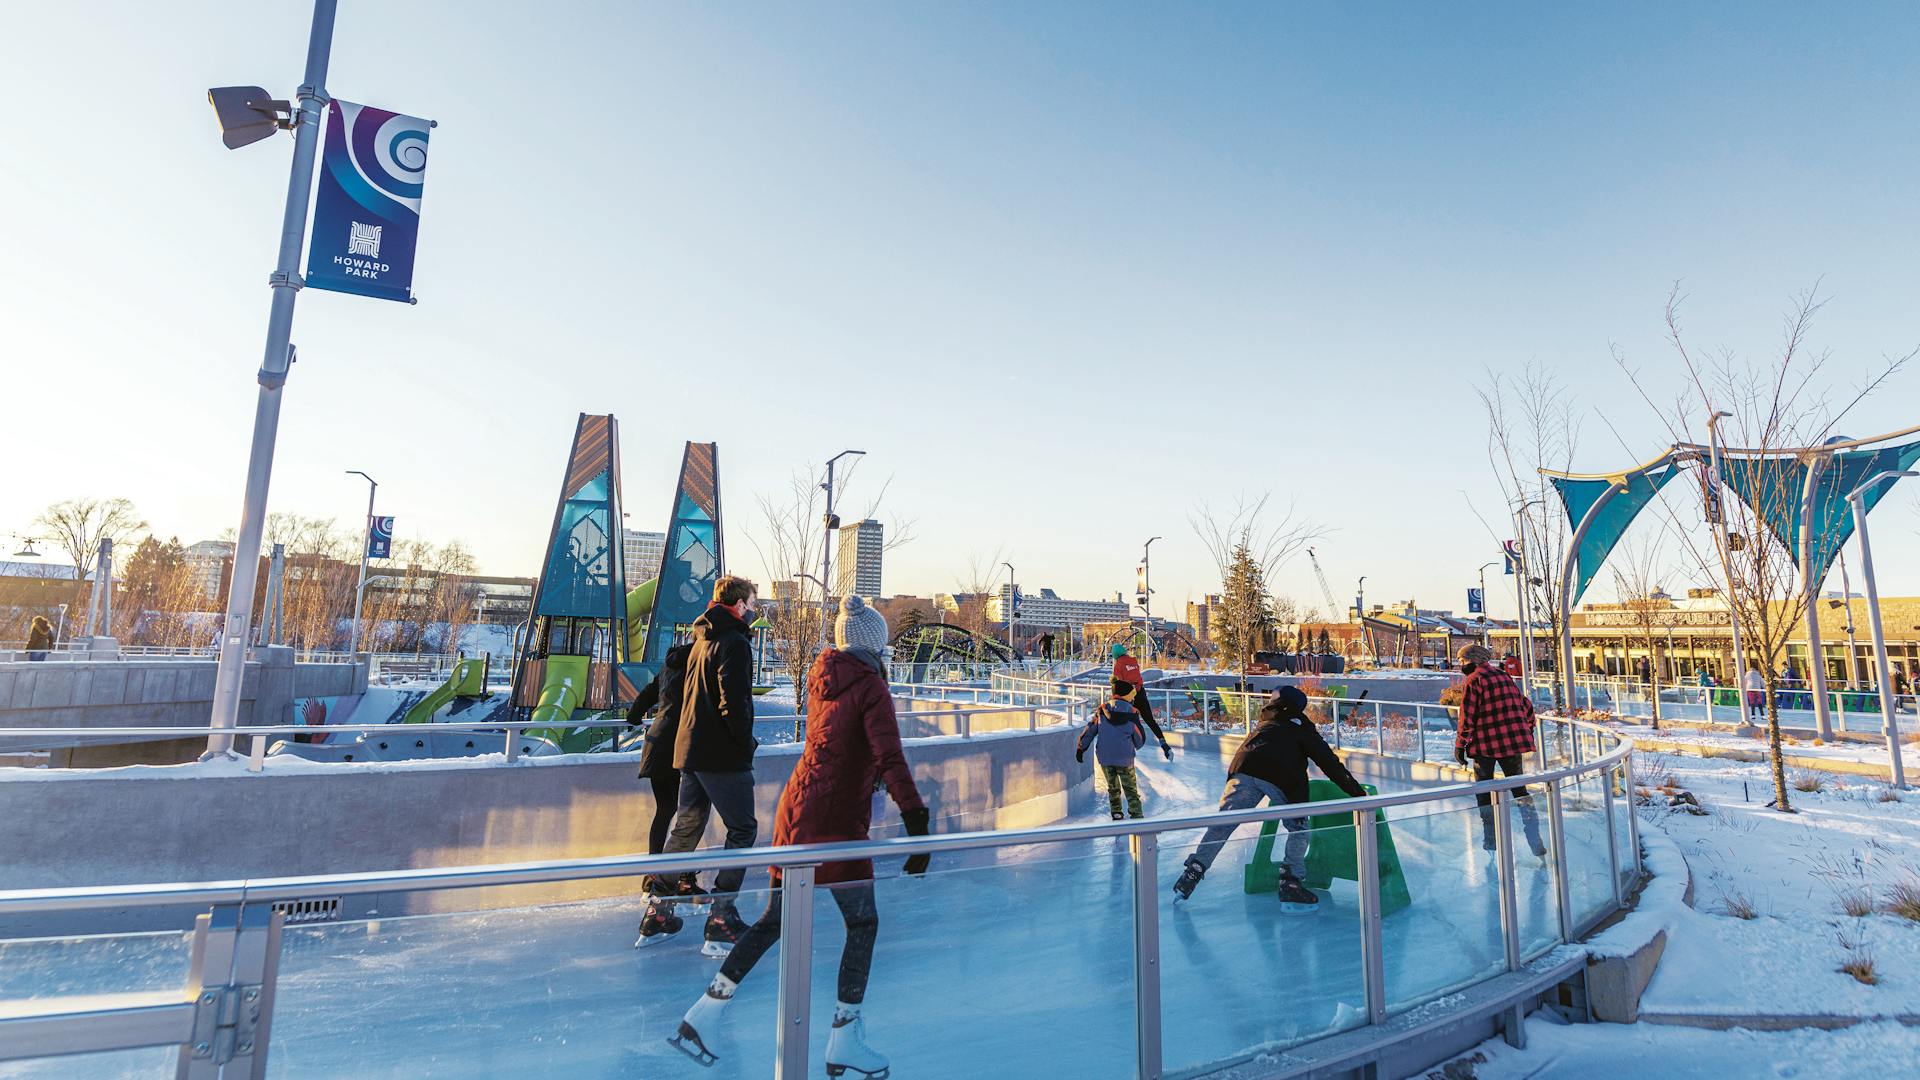 Skaters on the Howard Park Ice Trail in South Bend, Indiana